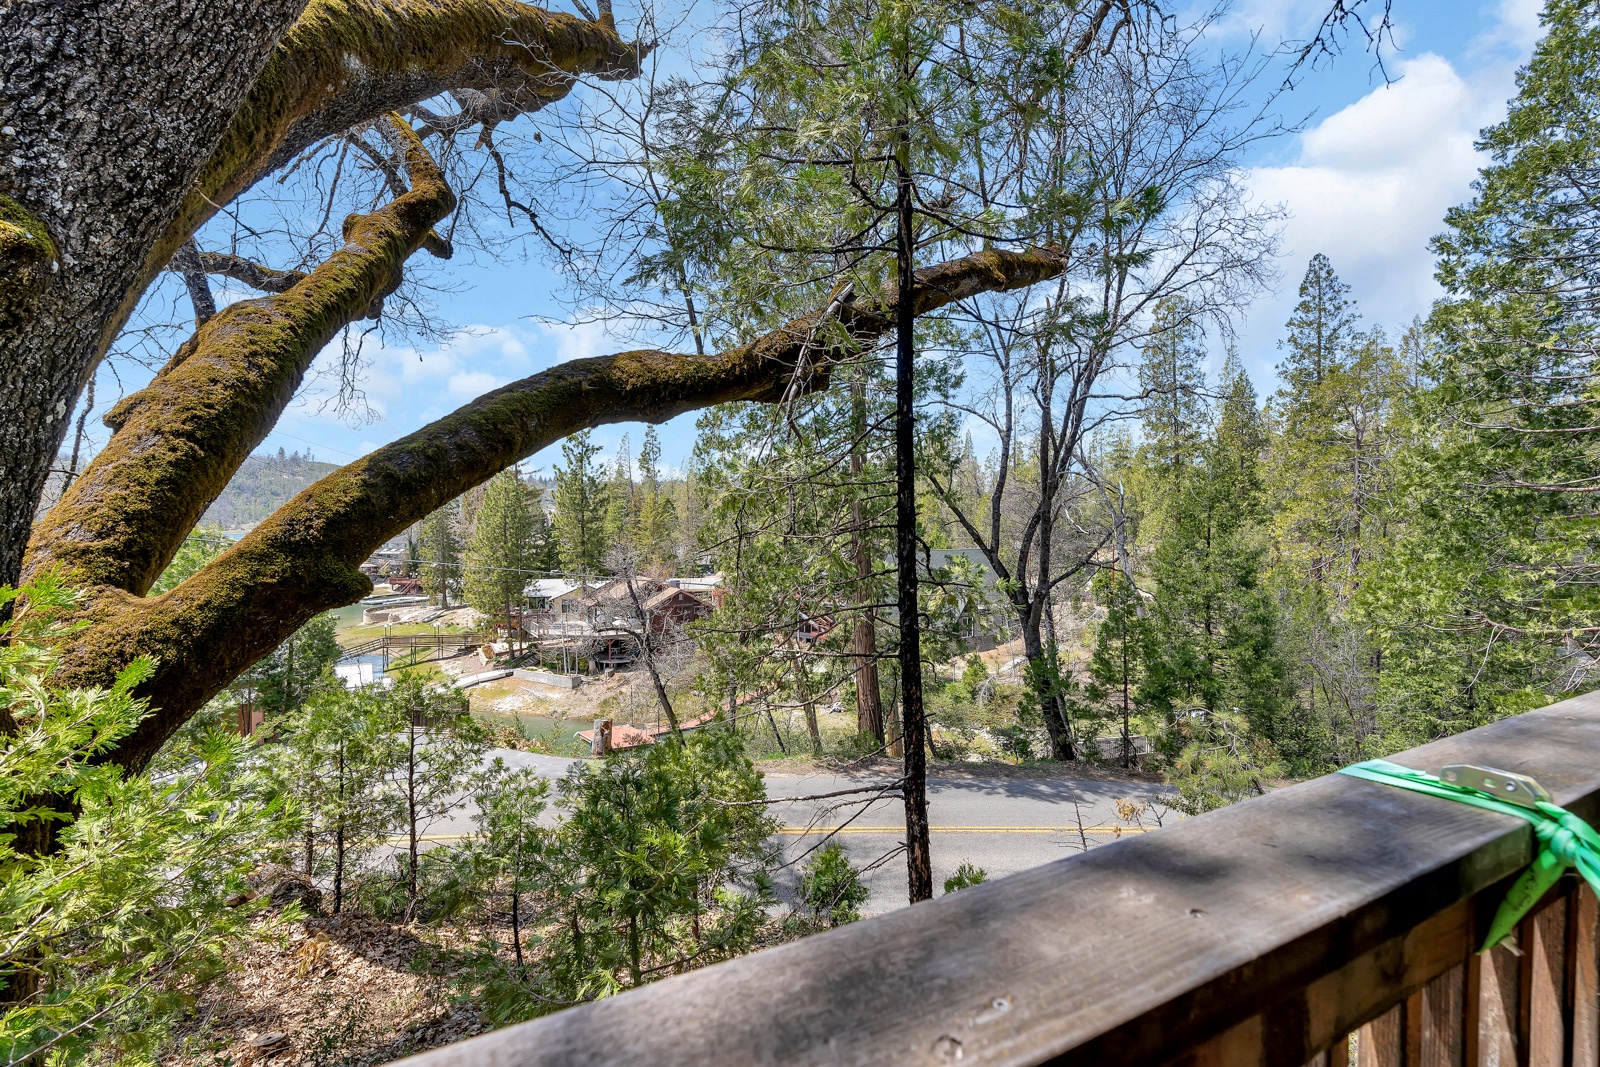 Enjoy the treehouse-like views from the upper & lower decks